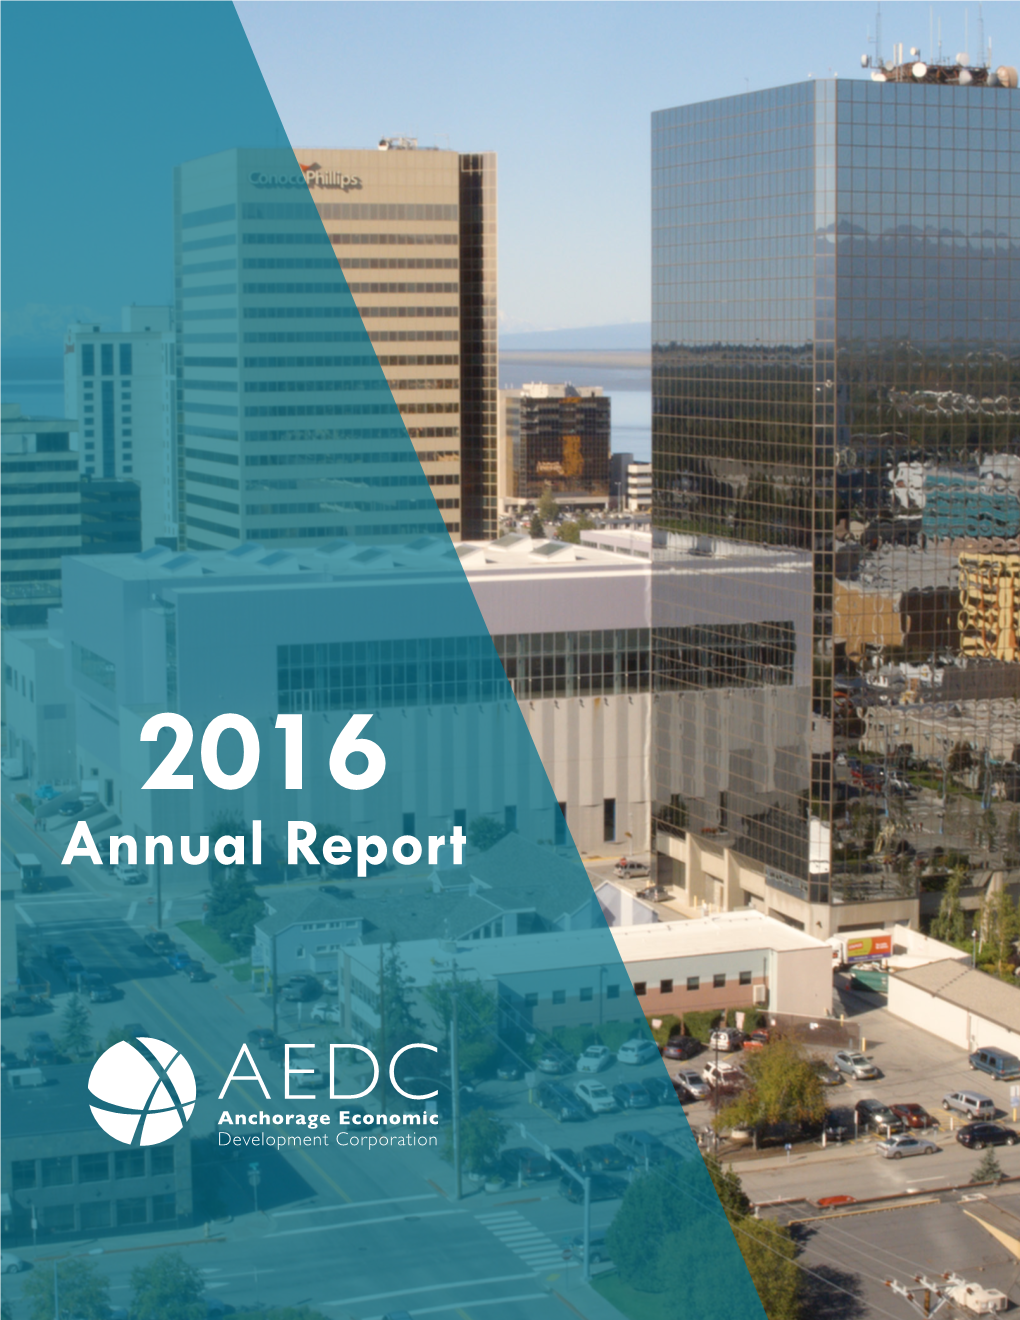 Annual Report 2016 Voting Members Chair – James Hasle BDO USA, LLP